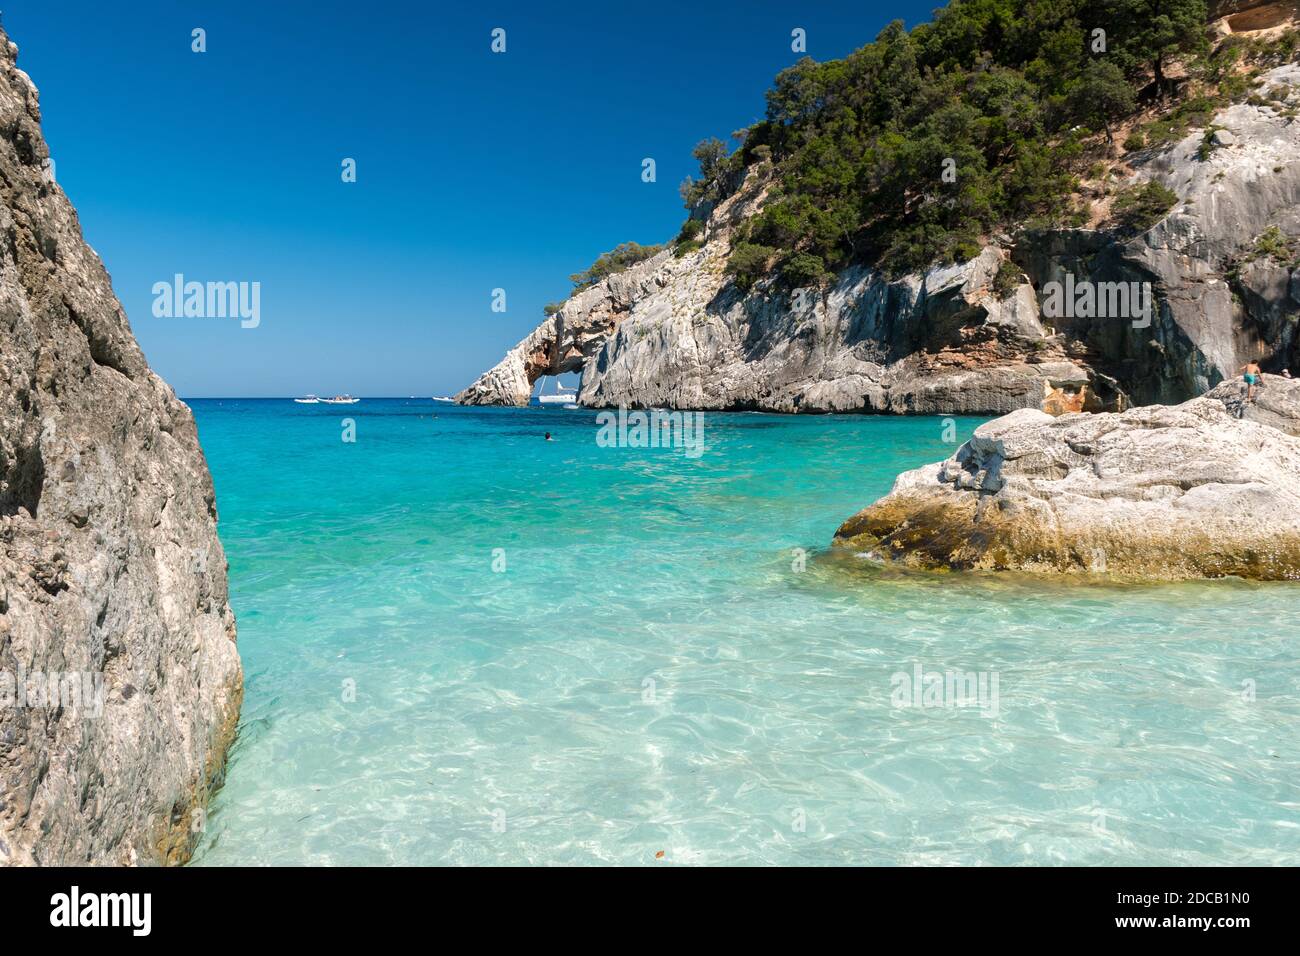 The coastline in Cala Goloritze, famous beach in the Orosei gulf (Ogliastra, Sardinia, Italy) with a natural arch in the background Stock Photo